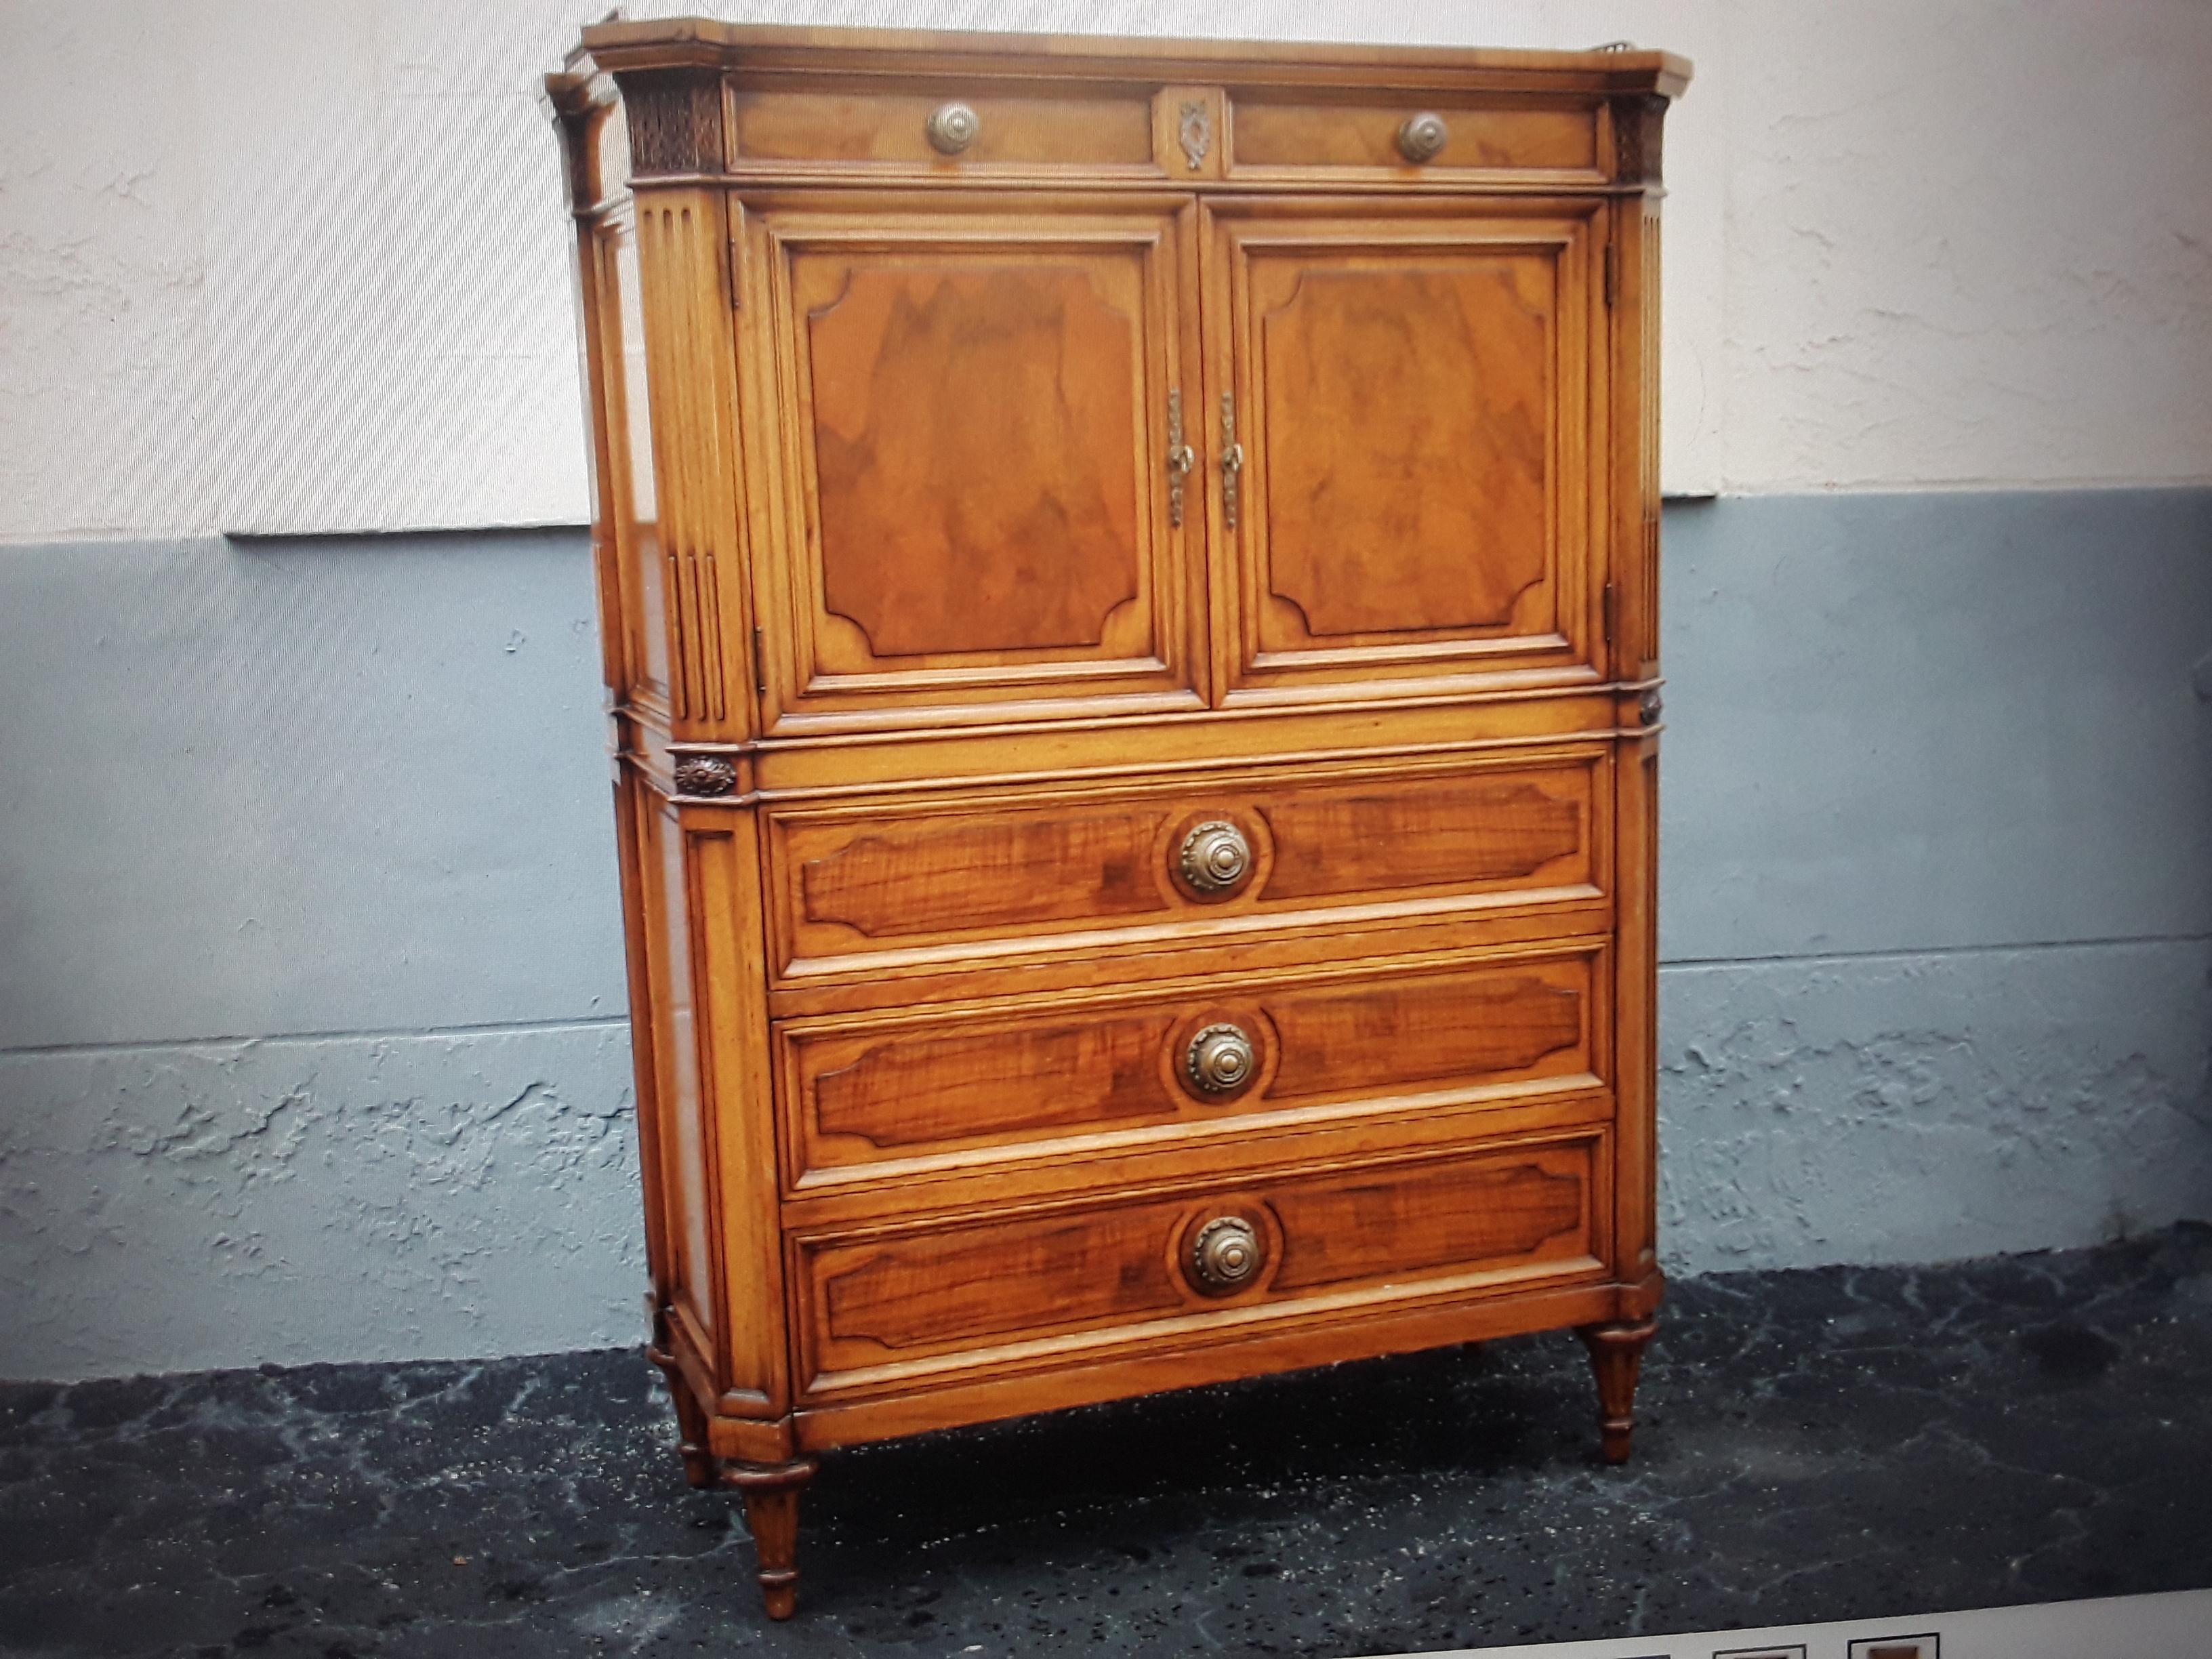 1960's Traditional Vintage Tall Exotic Walnut Chest of Drawers. Manufactured by Kanges and excellent quality workmanship. Please look closely at pictures, very good interior storage.